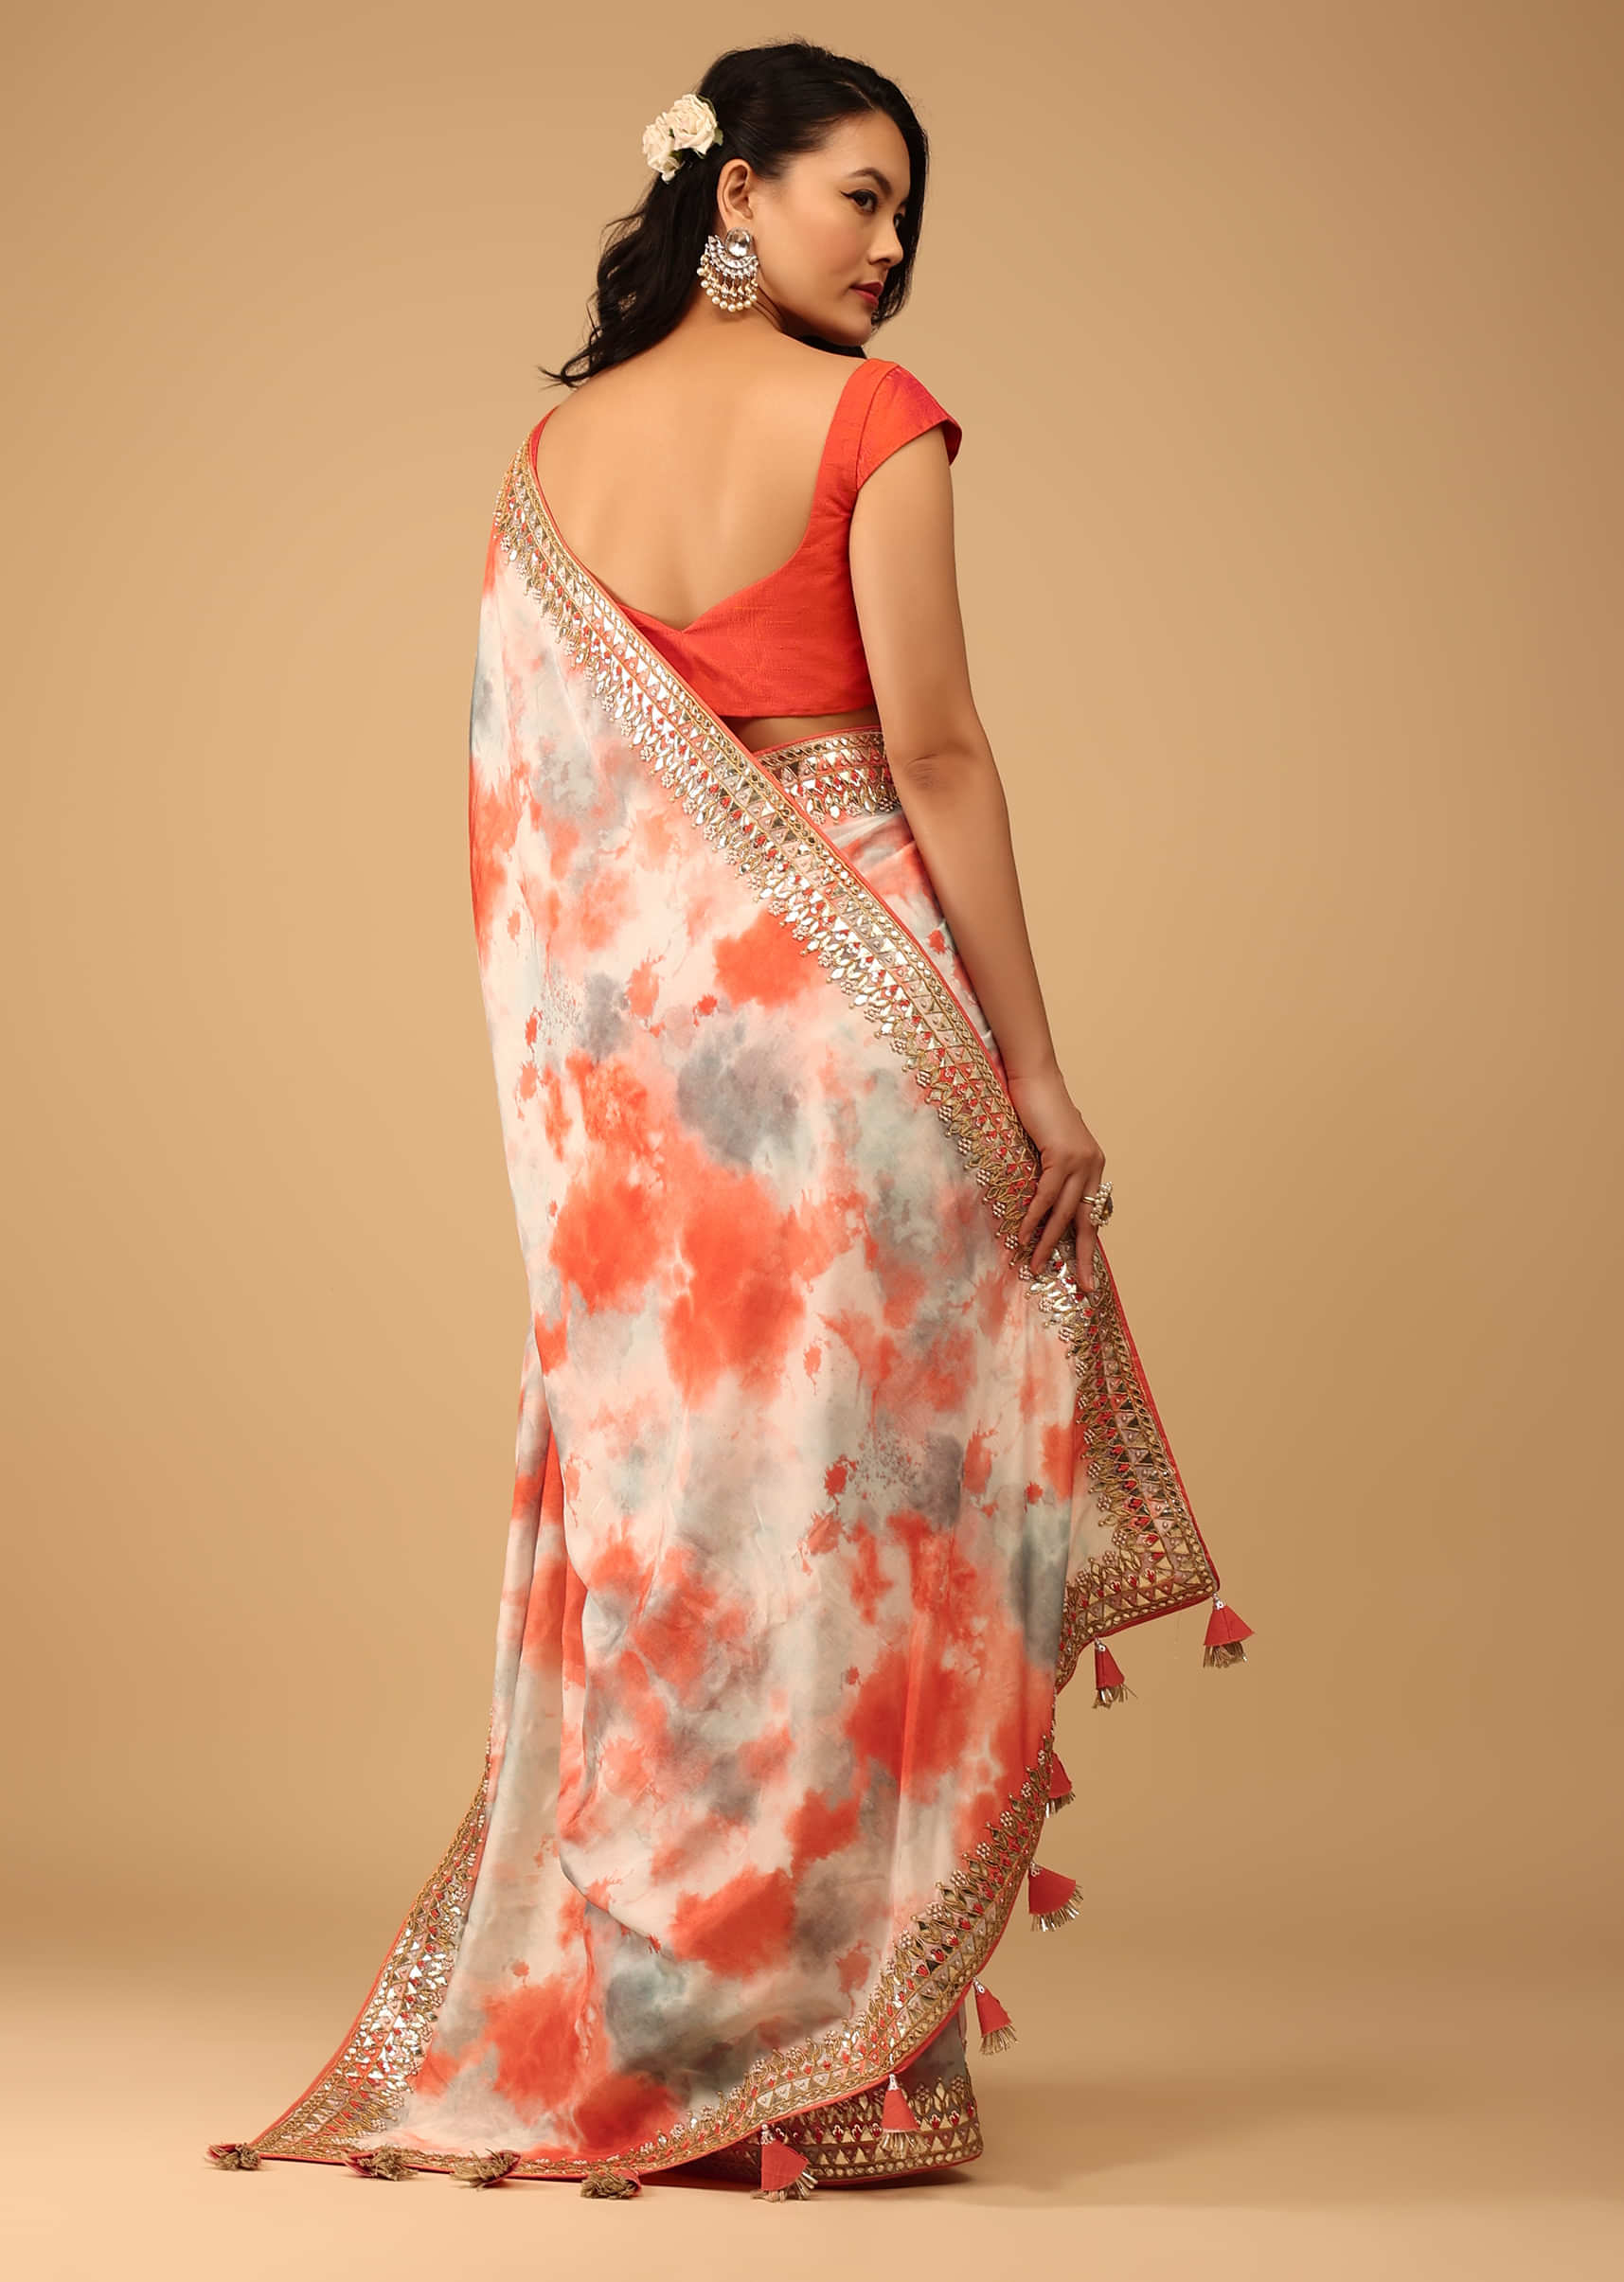 Tie-Dye Muslin Saree In Orange, White & Grey Shades With Embroidery